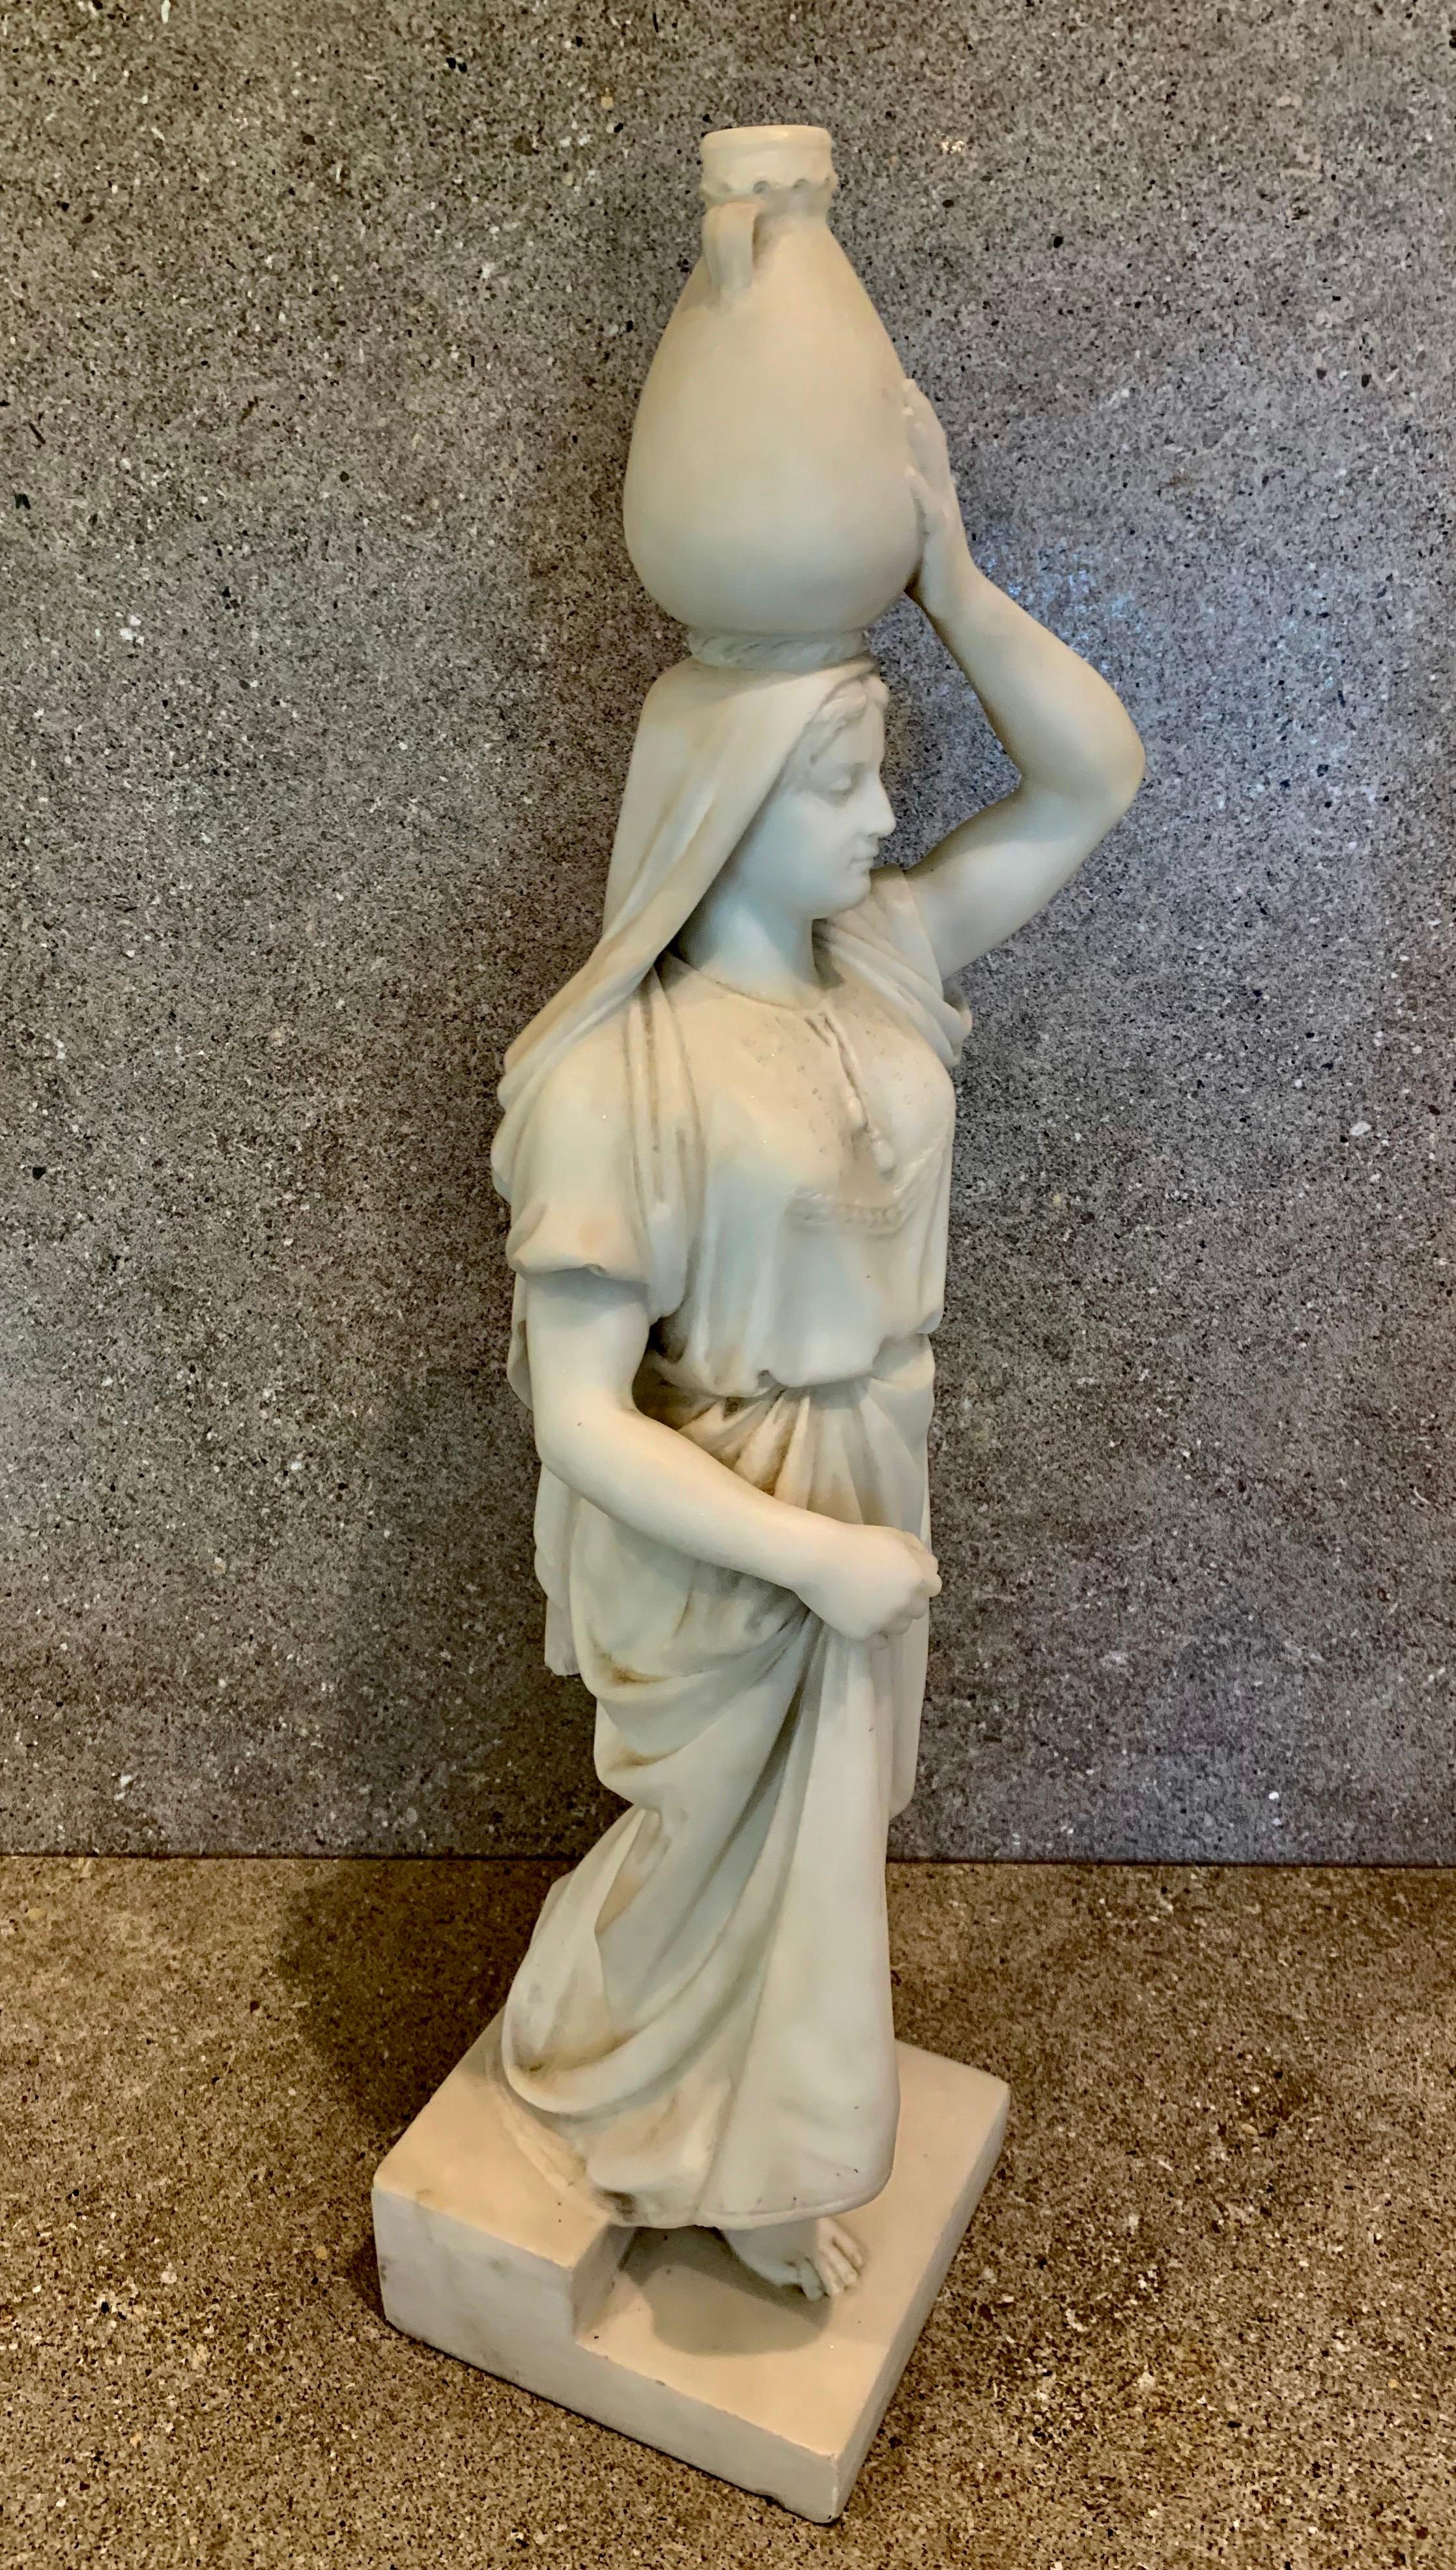 Large white marble figurine
Signed on the base:
C PAULUS SCULPTOR JERUSALEM 1882
Circa late 19th
Stepped marble base
25 in. (66.5 cm.) high by 6 1/2 in (16.5cm) square the marble base size.